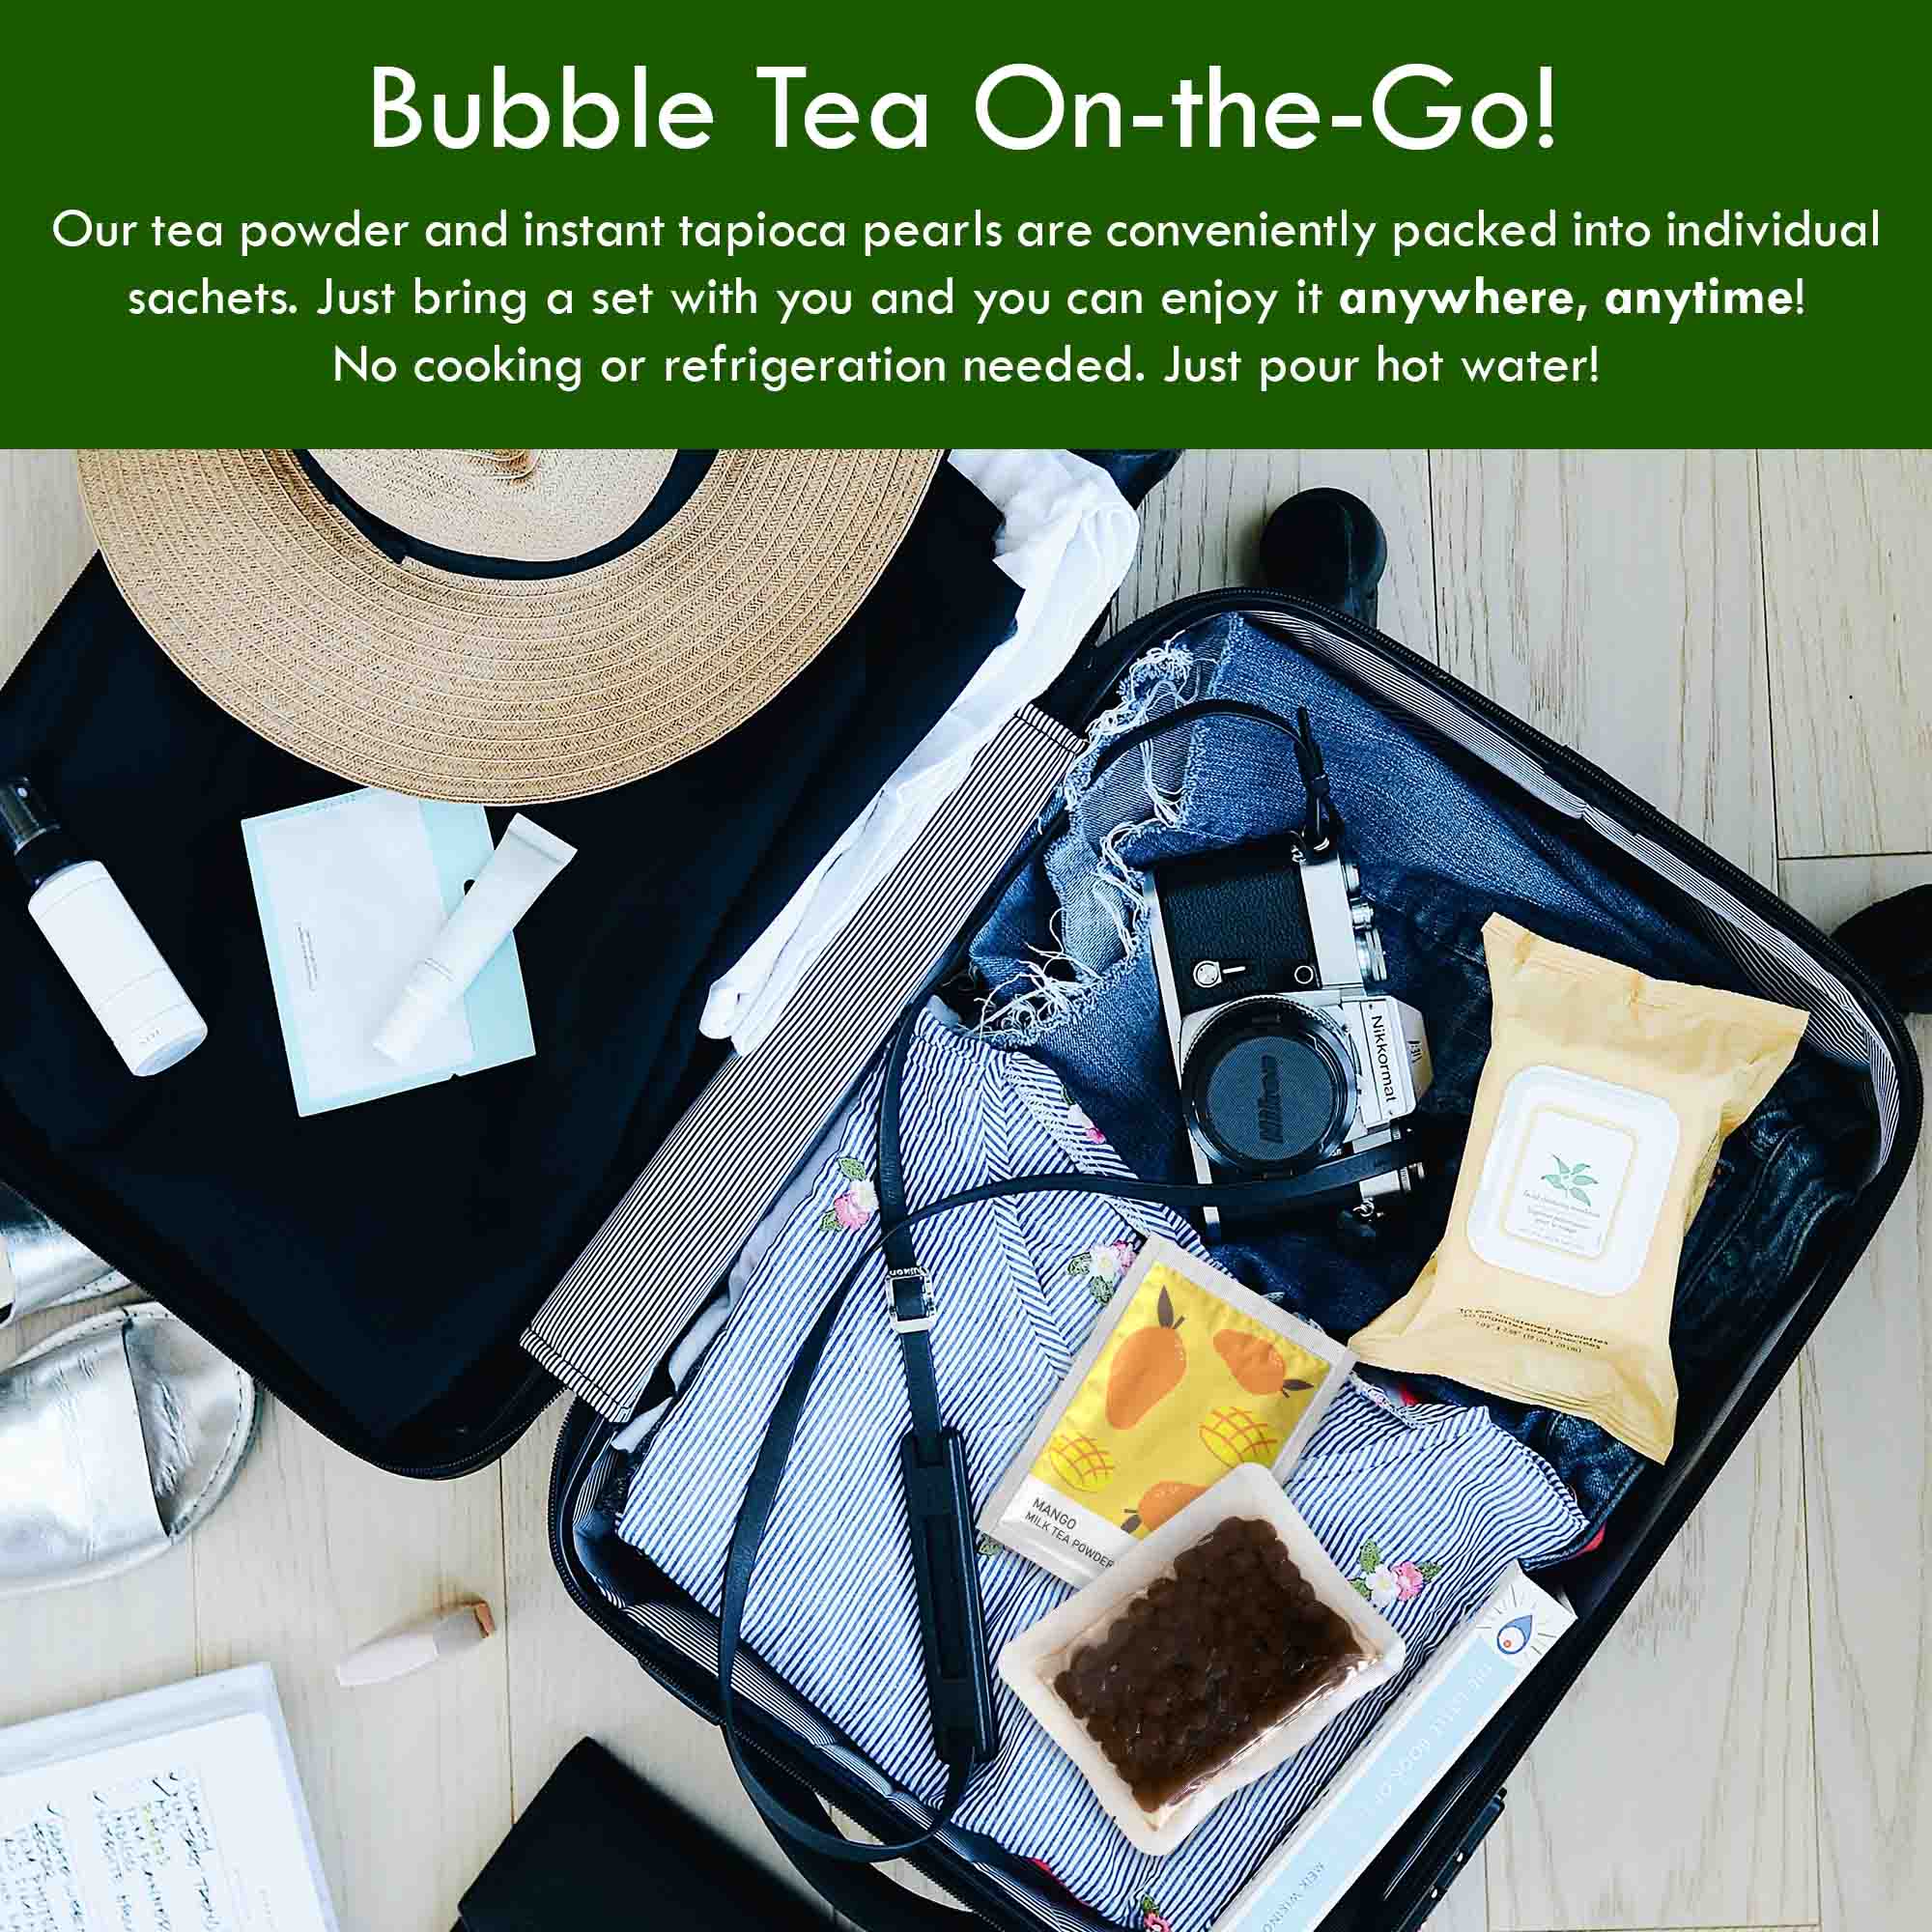 bubble tea sachets in suitcase to bring to anywhere